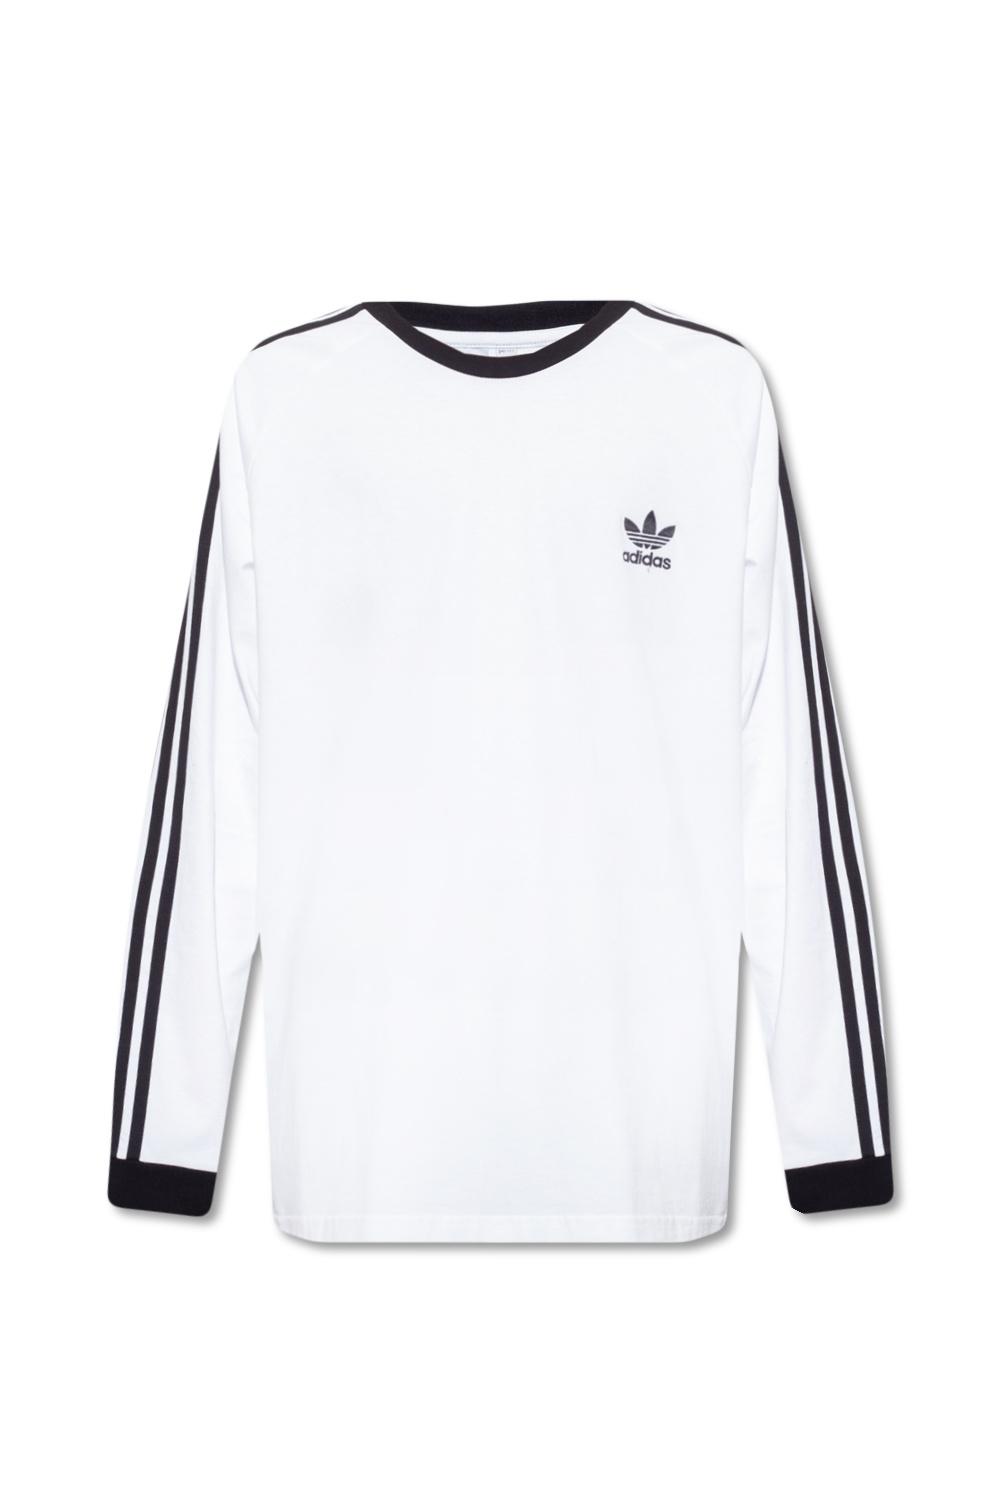 adidas Originals Cotton Long-sleeved T-shirt in White for Men | Lyst